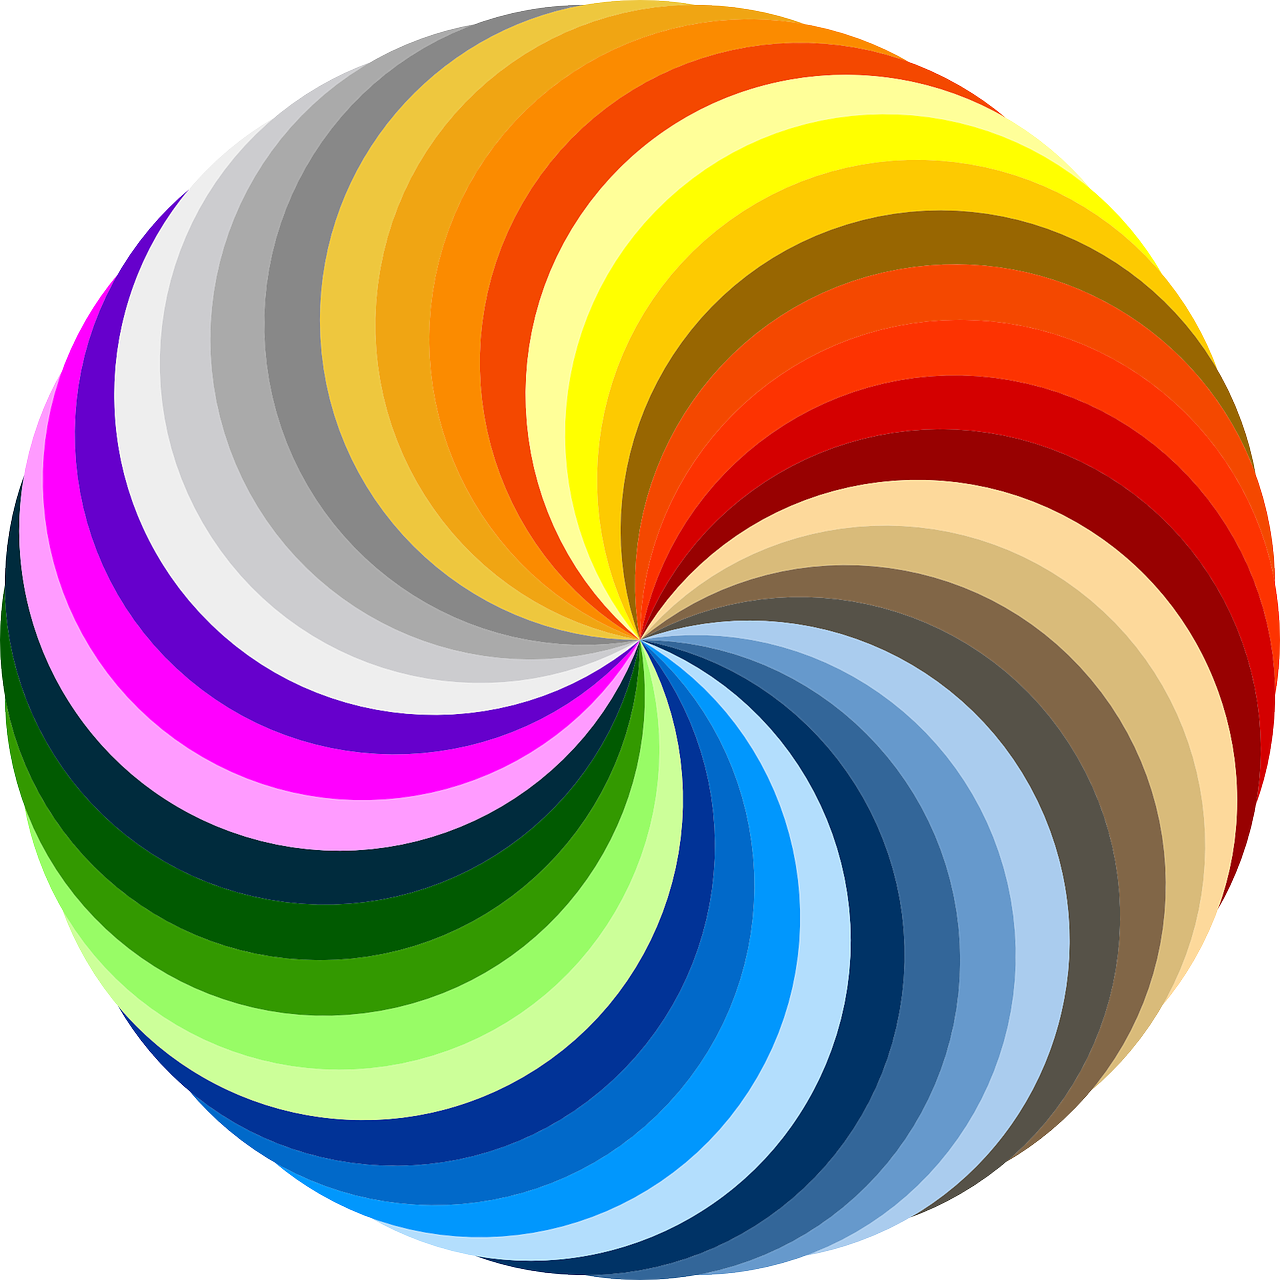 a multicolored circular object on a white background, a picture, colorful palette illustration, whirlwind, no gradients, 6 colors